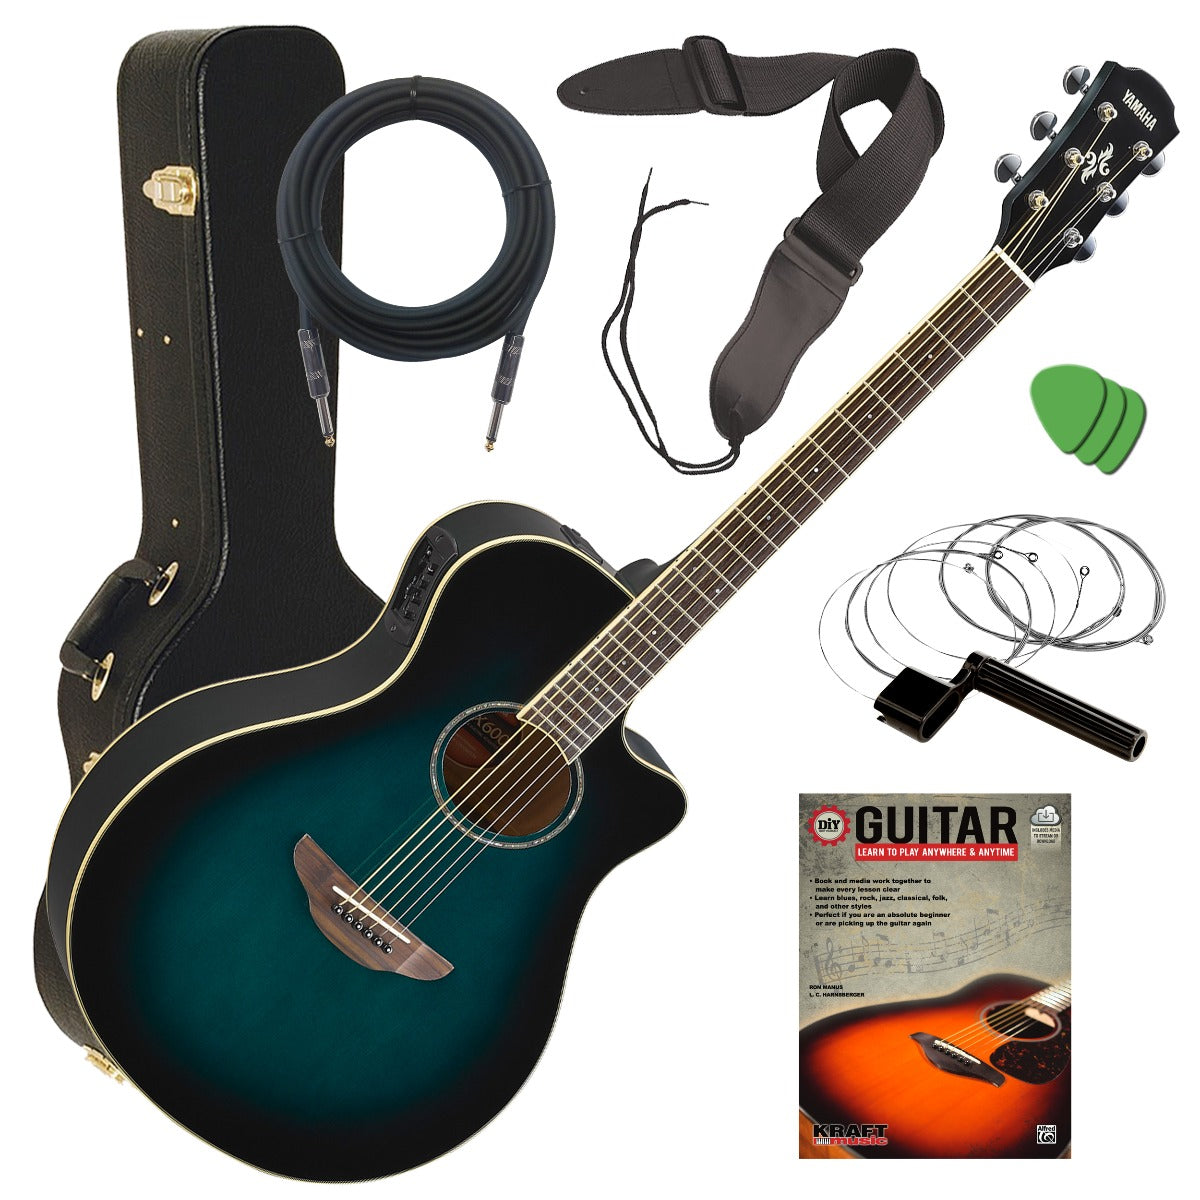 Yamaha APX 600 -Thin-line Cutaway Acoustic Electric Guitar